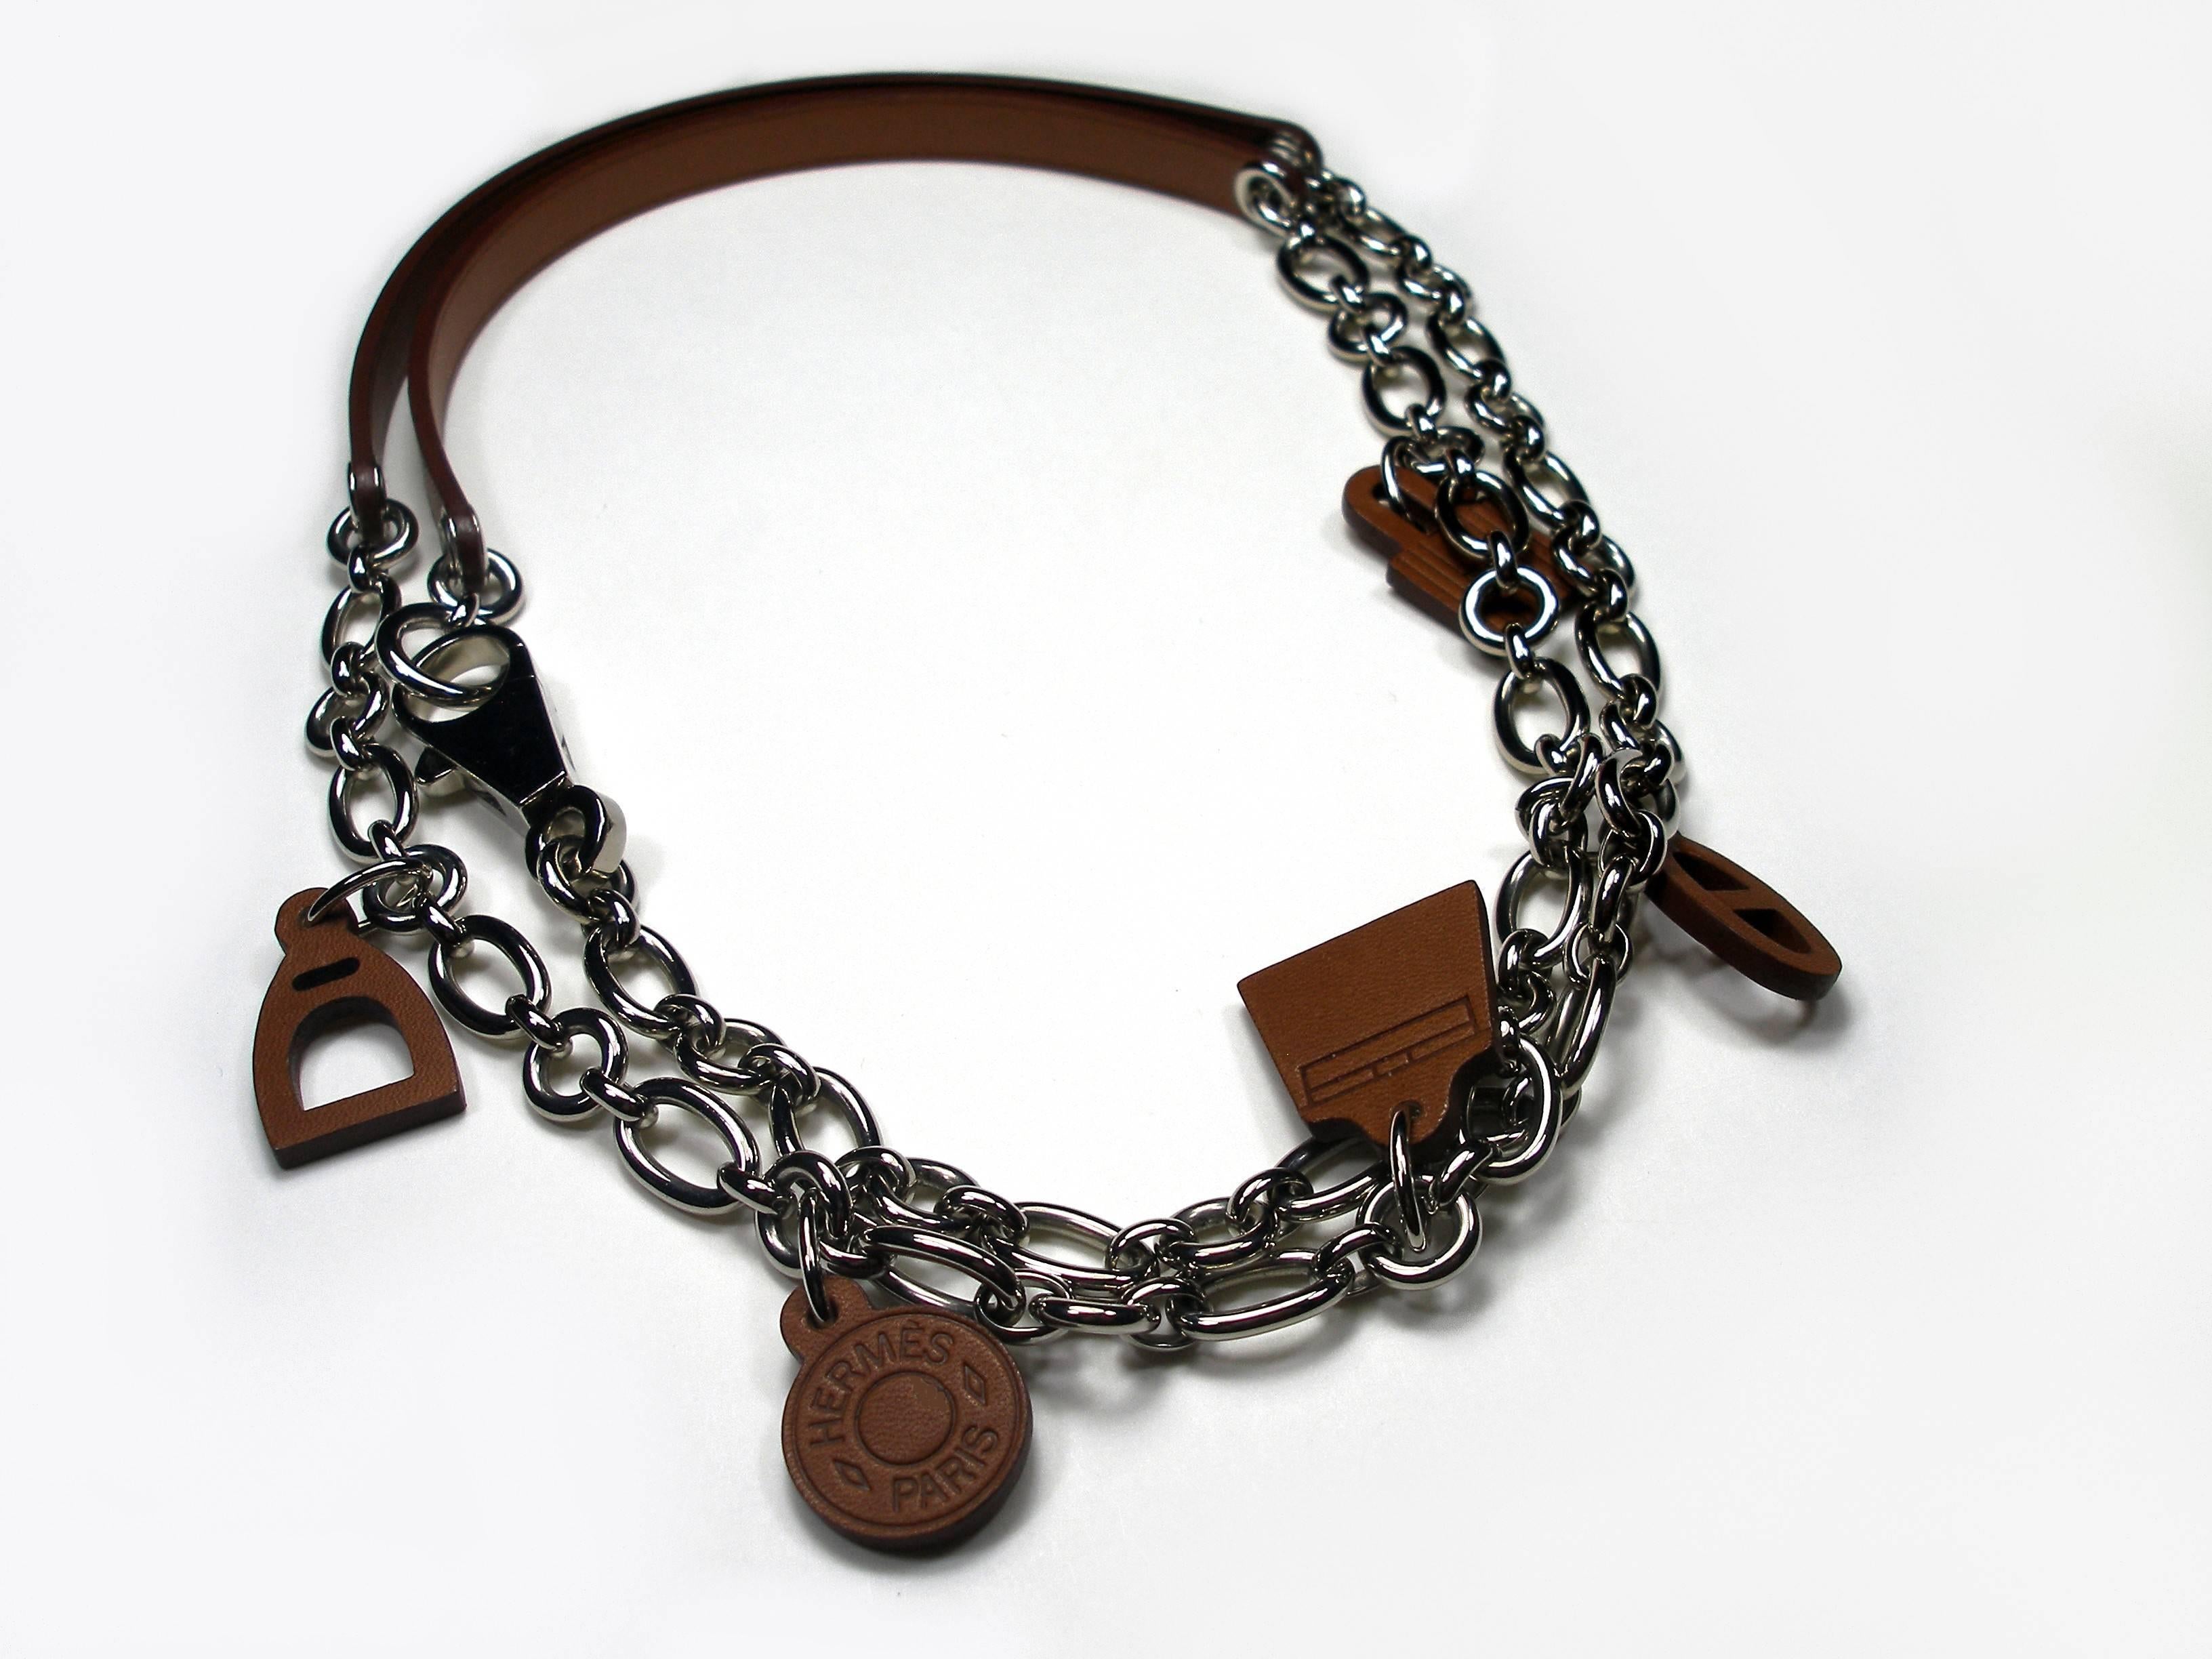 Rare Hermès Necklace Amulette in Barenia leather
Palladium and leather 
Longueur : 97 cm en simple 
Brand new / Never used 
Production / stamp : P in square
Its comes with Hermès box 